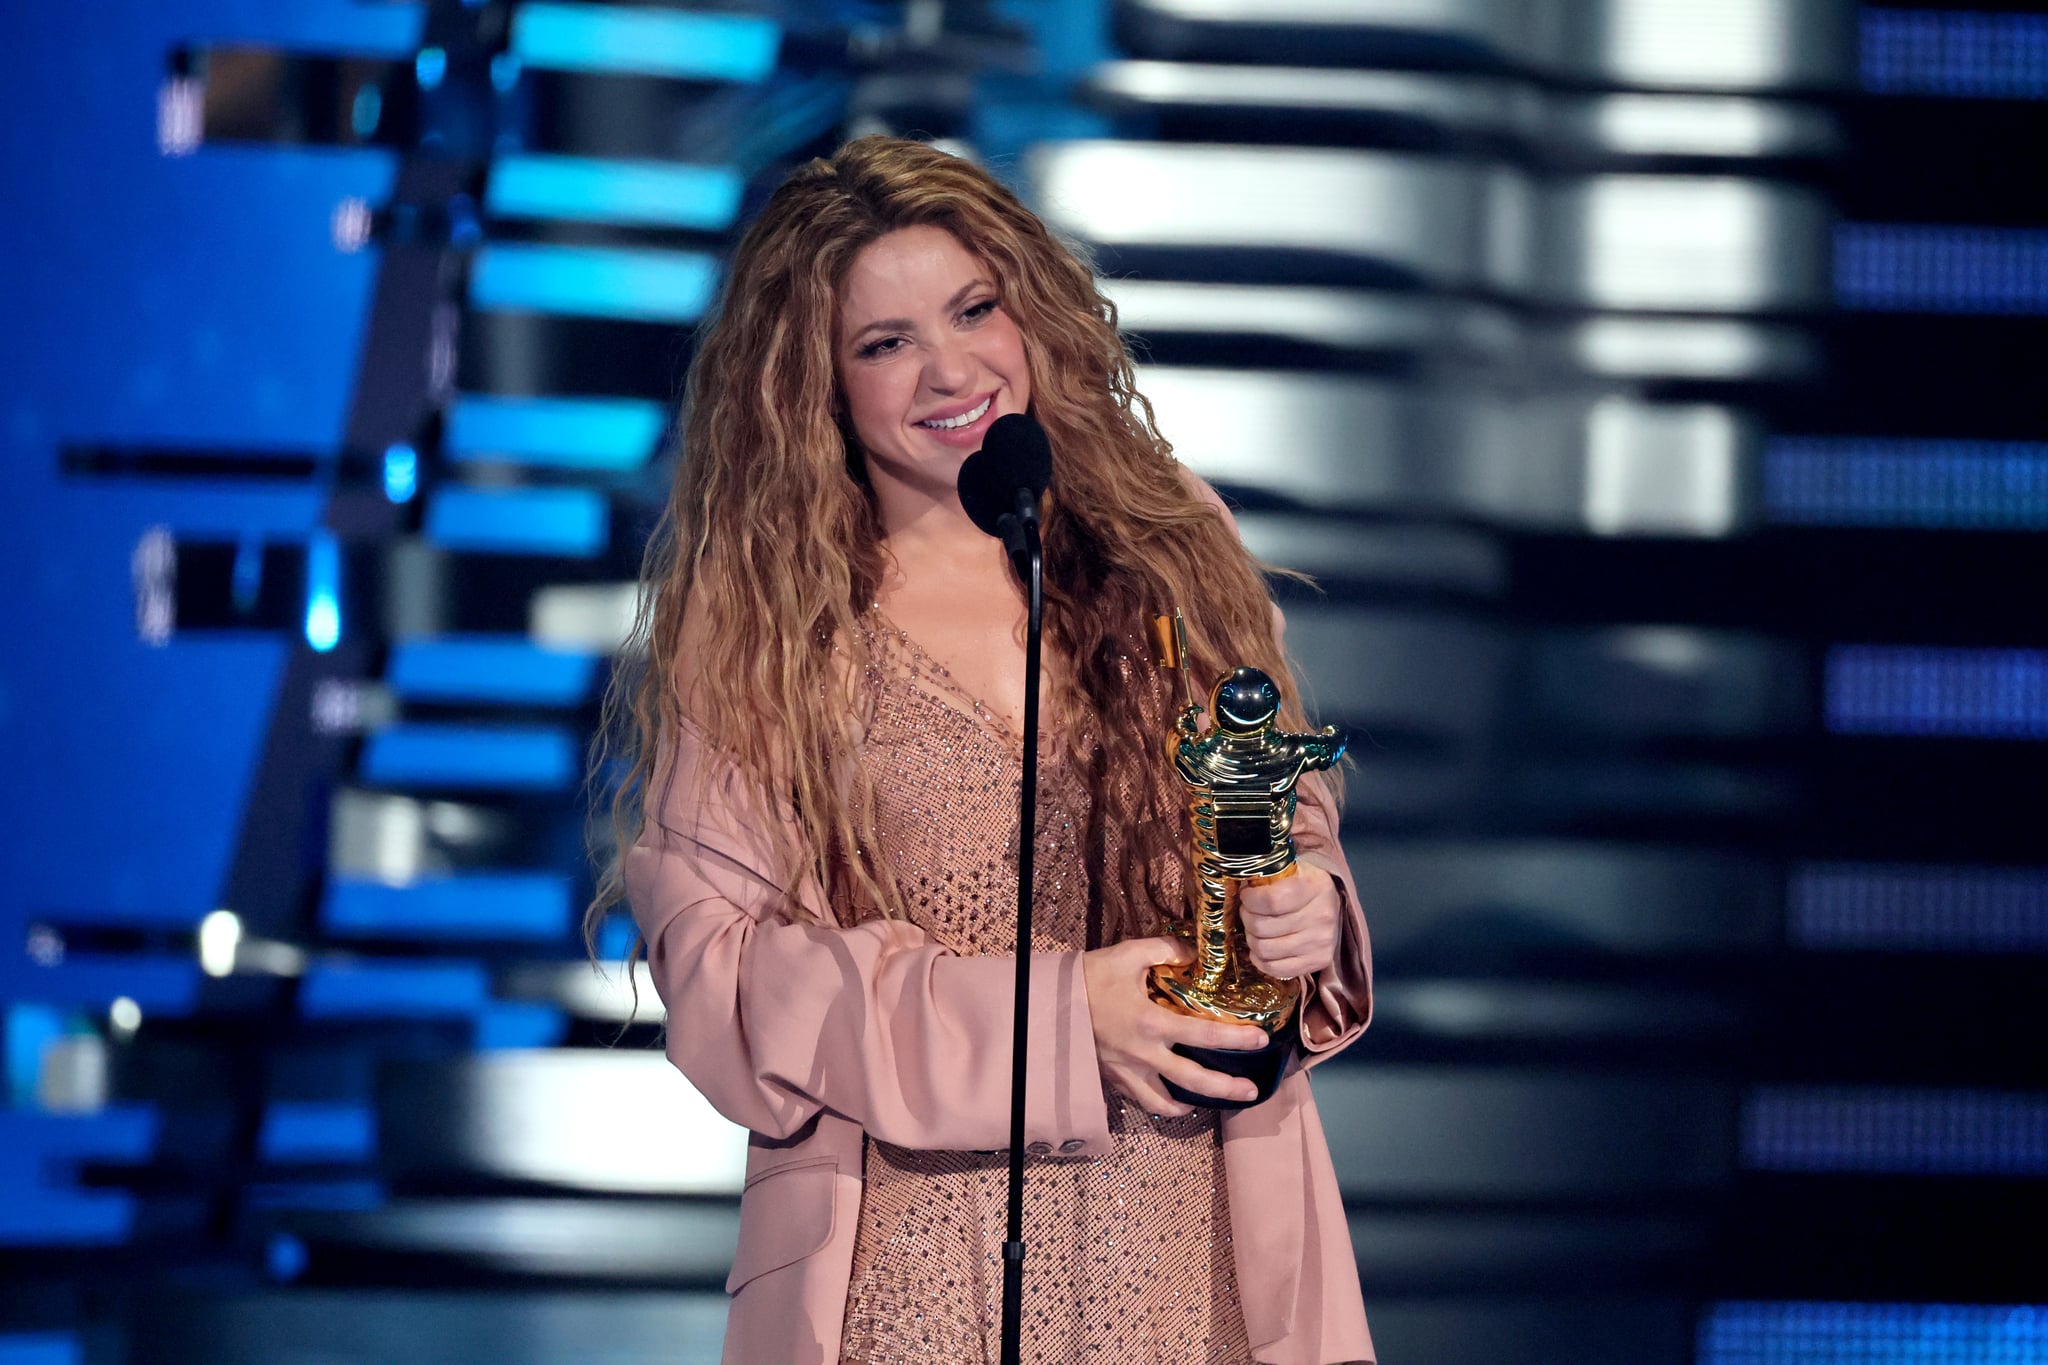 NEWARK, NEW JERSEY - SEPTEMBER 12: Shakira accepts the Michael Jackson Video Vanguard Award onstage at the 2023 MTV Video Music Awards on September 12, 2023 in Newark, New Jersey. (Photo by Dia Dipasupil/Getty Images)